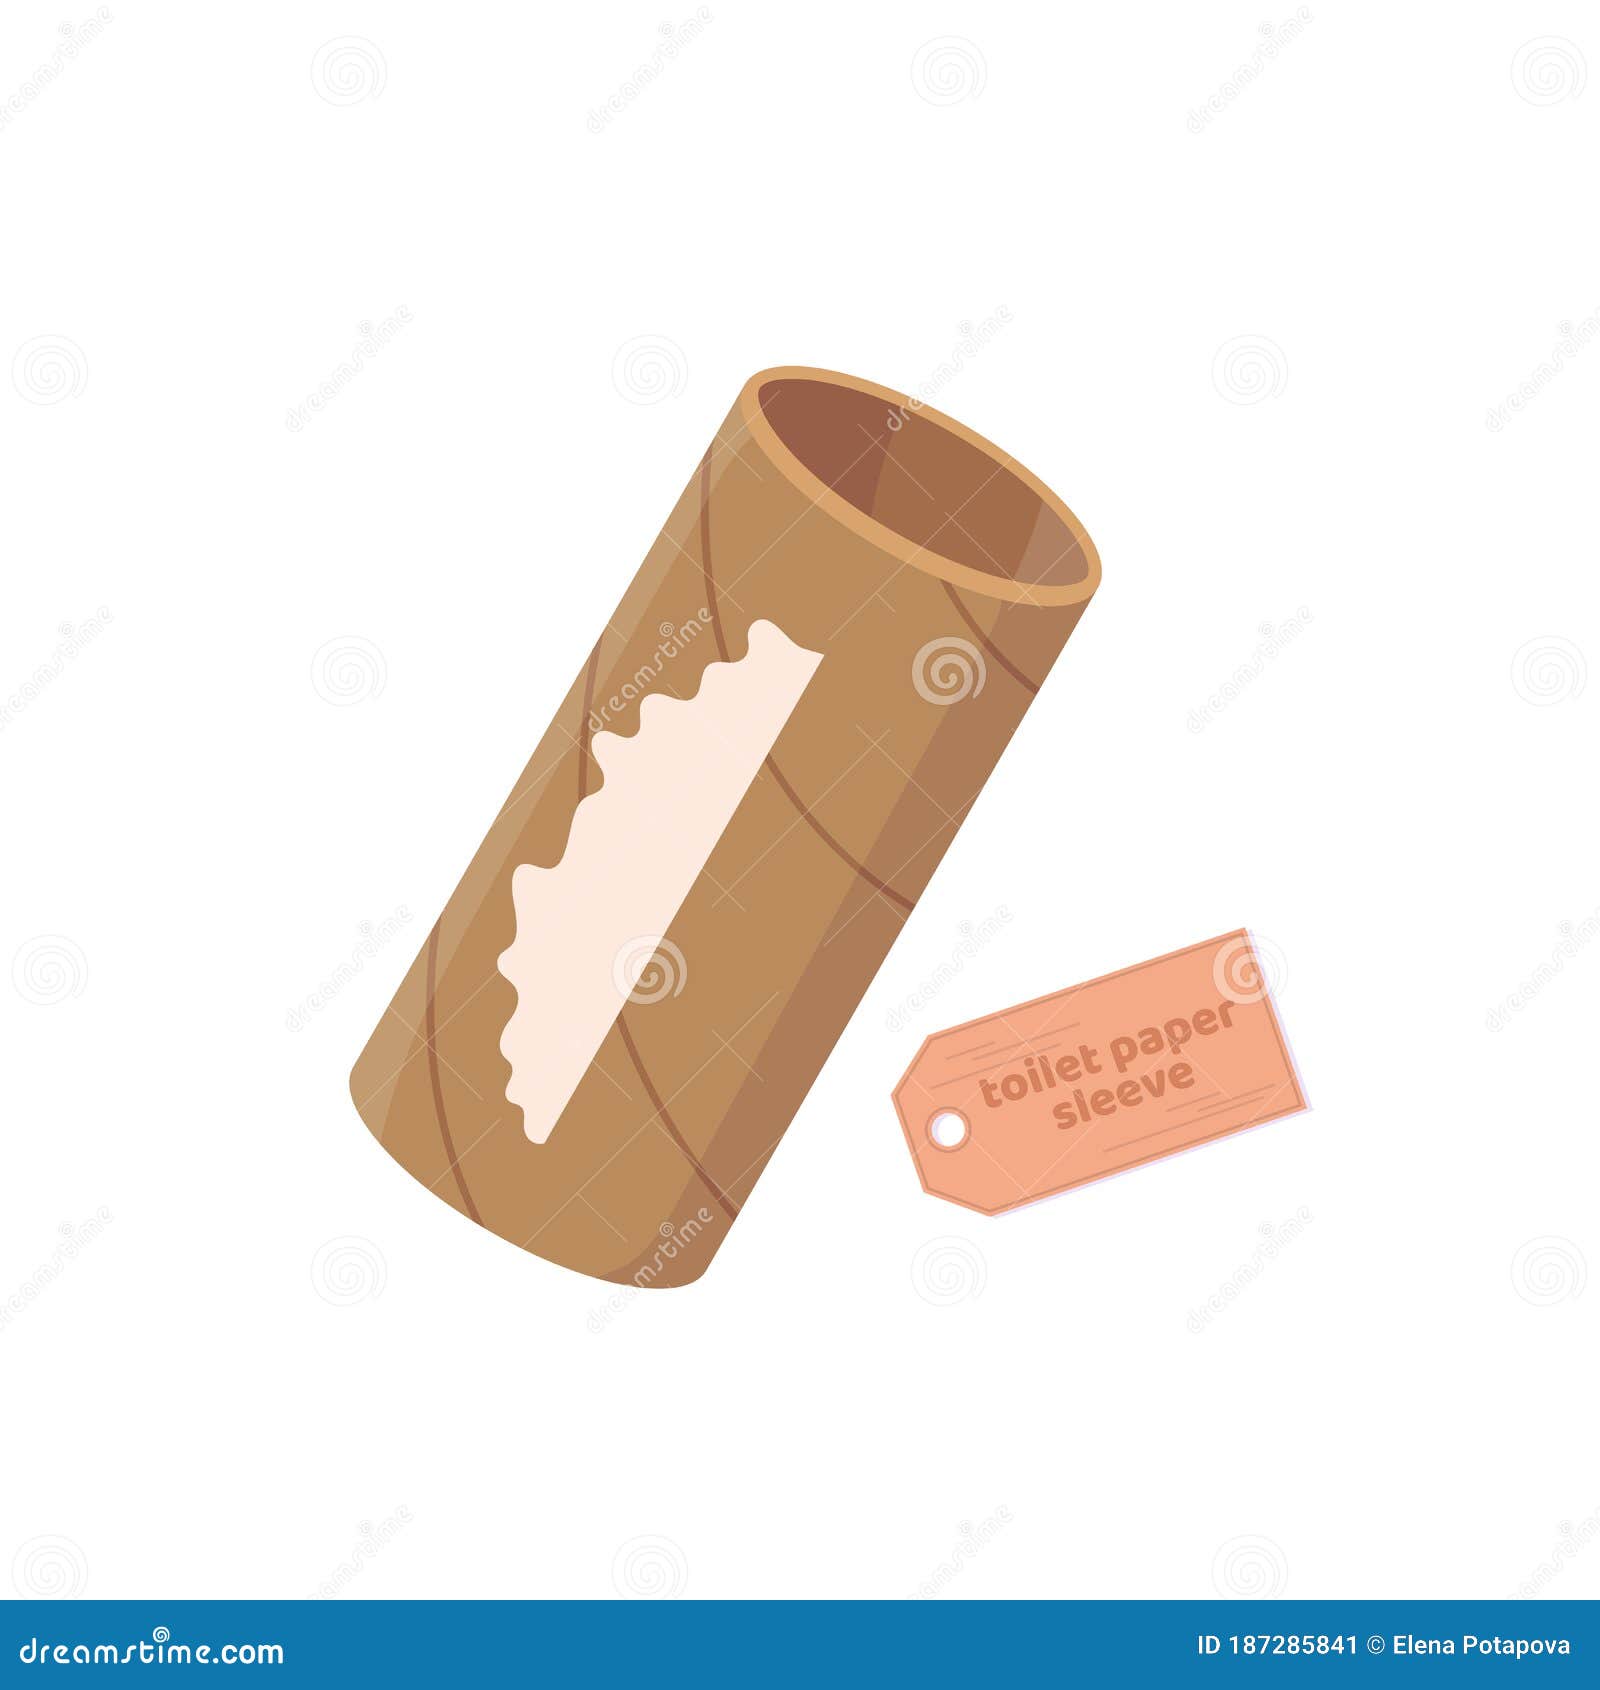 Empty Toilet Paper Tube, Roll. Toilet Paper Run Out. Vector Cartoon Flat  Illustration Isolated on White. Stock Vector - Illustration of idea, paper:  187285841